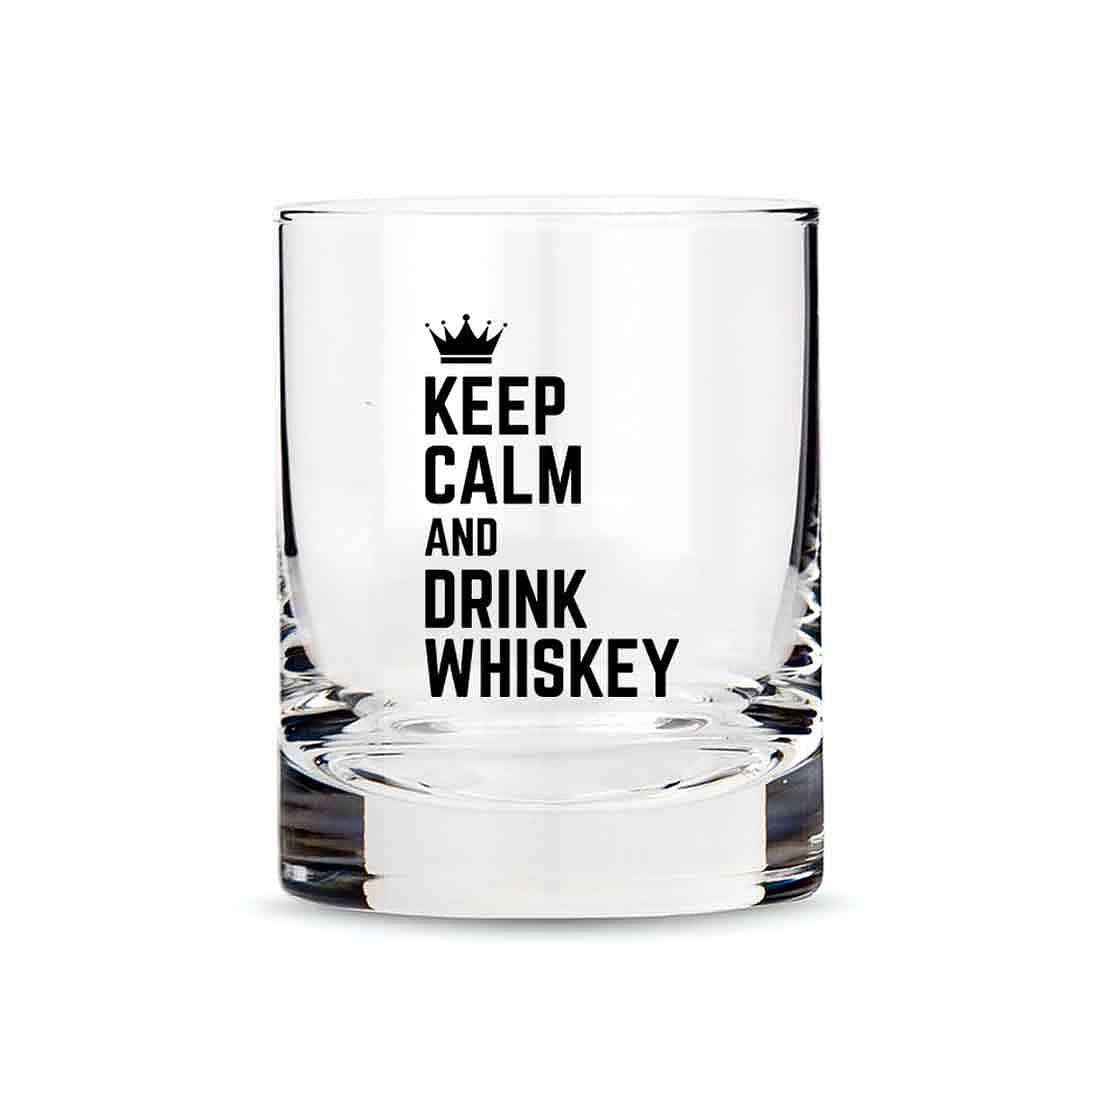 Whiskey Glasses Liquor Glass-  Anniversary Birthday Gift Funny Gifts for Husband Bf - KEEP CALM AND DRINK WHISKY Nutcase